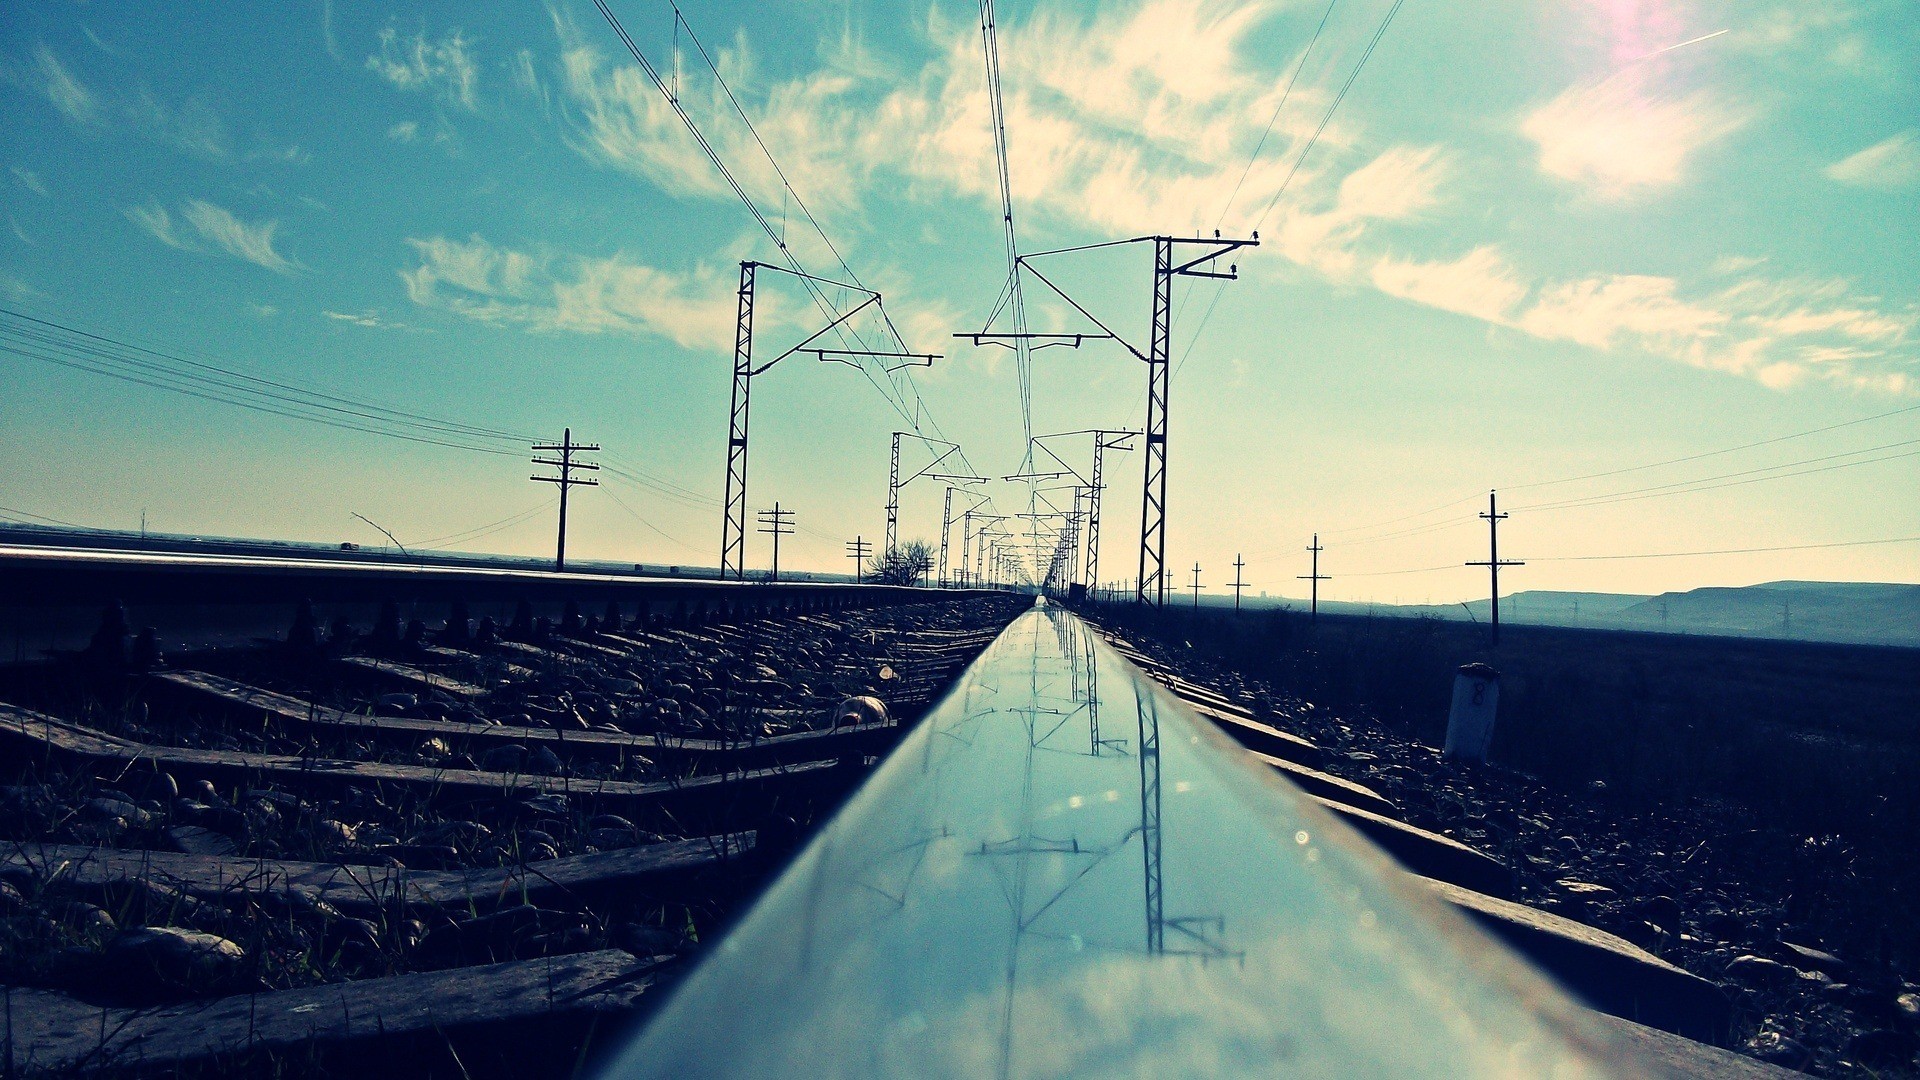 General 1920x1080 power lines railway worm's eye view landscape reflection filter utility pole sky clouds